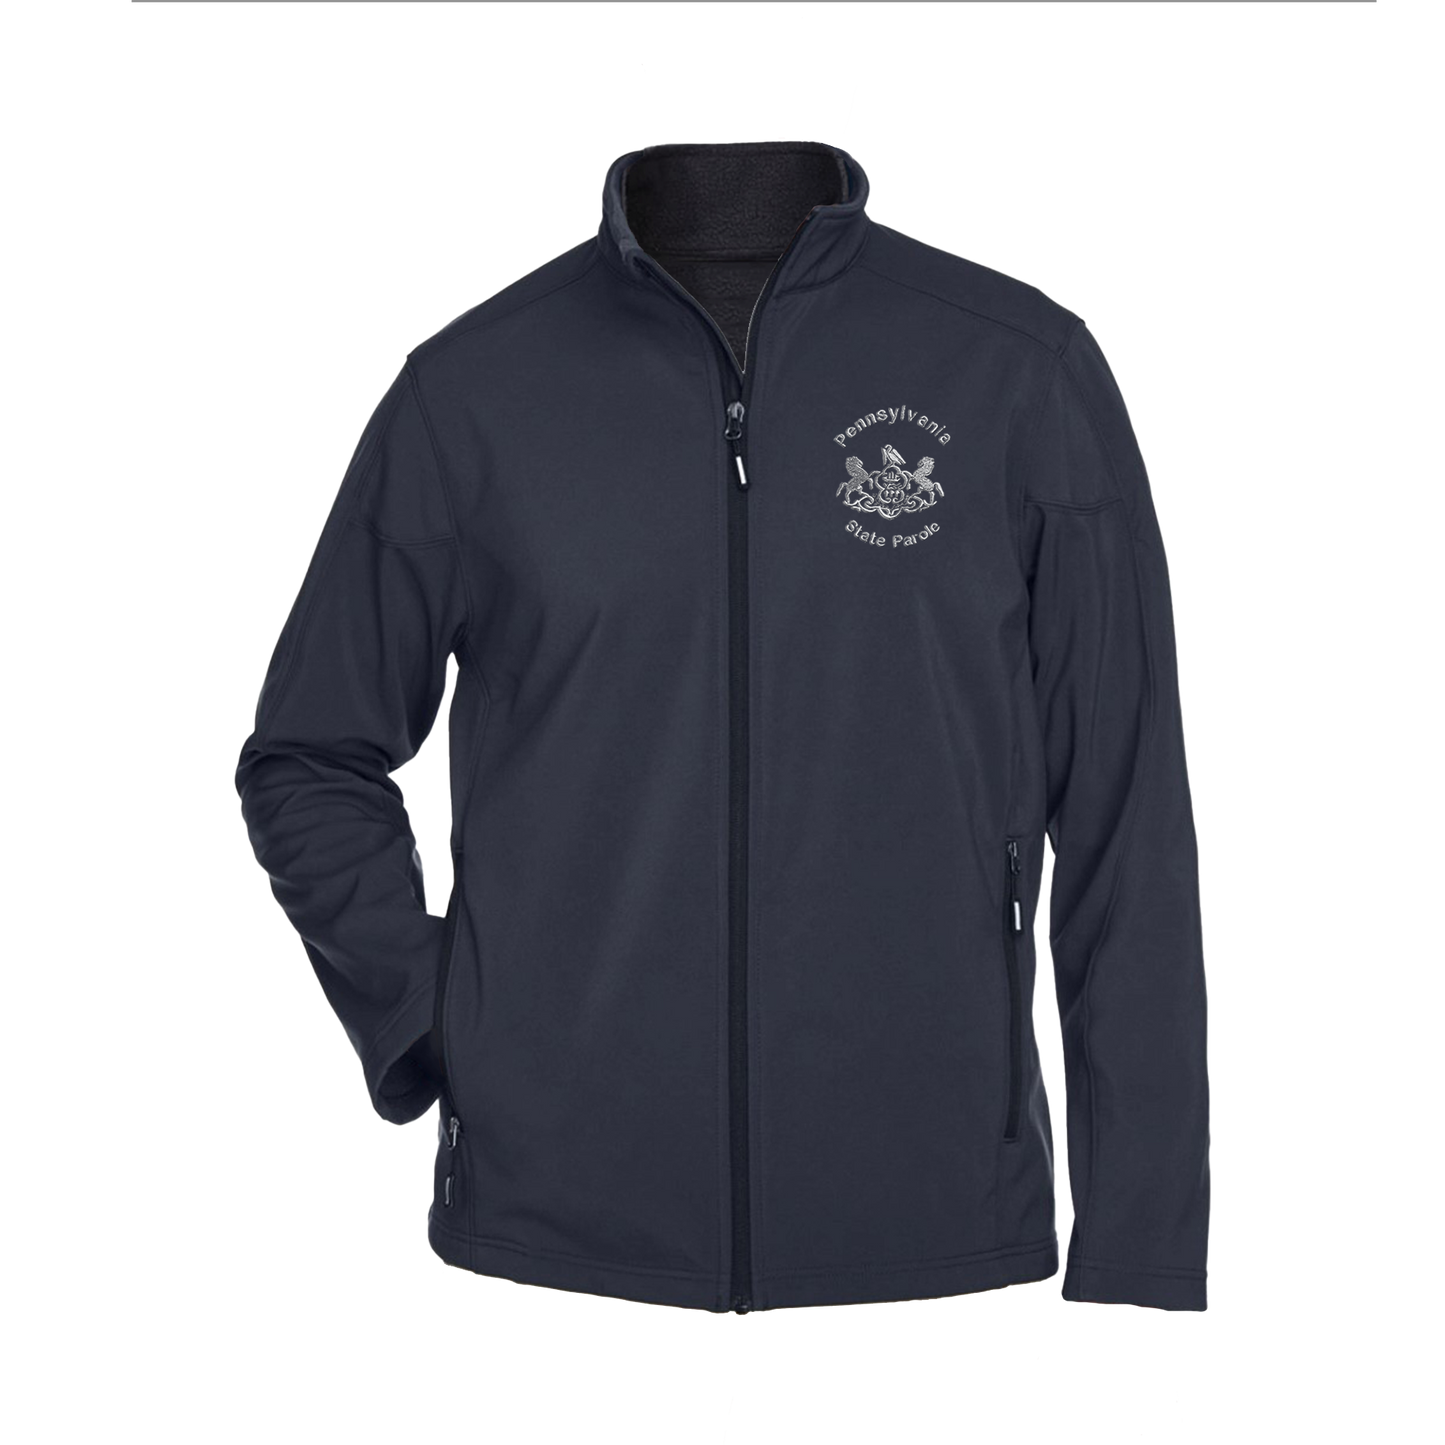 Men’s Premium Soft-Shell Jacket with Embroidered State Parole Horses (Various Colors)